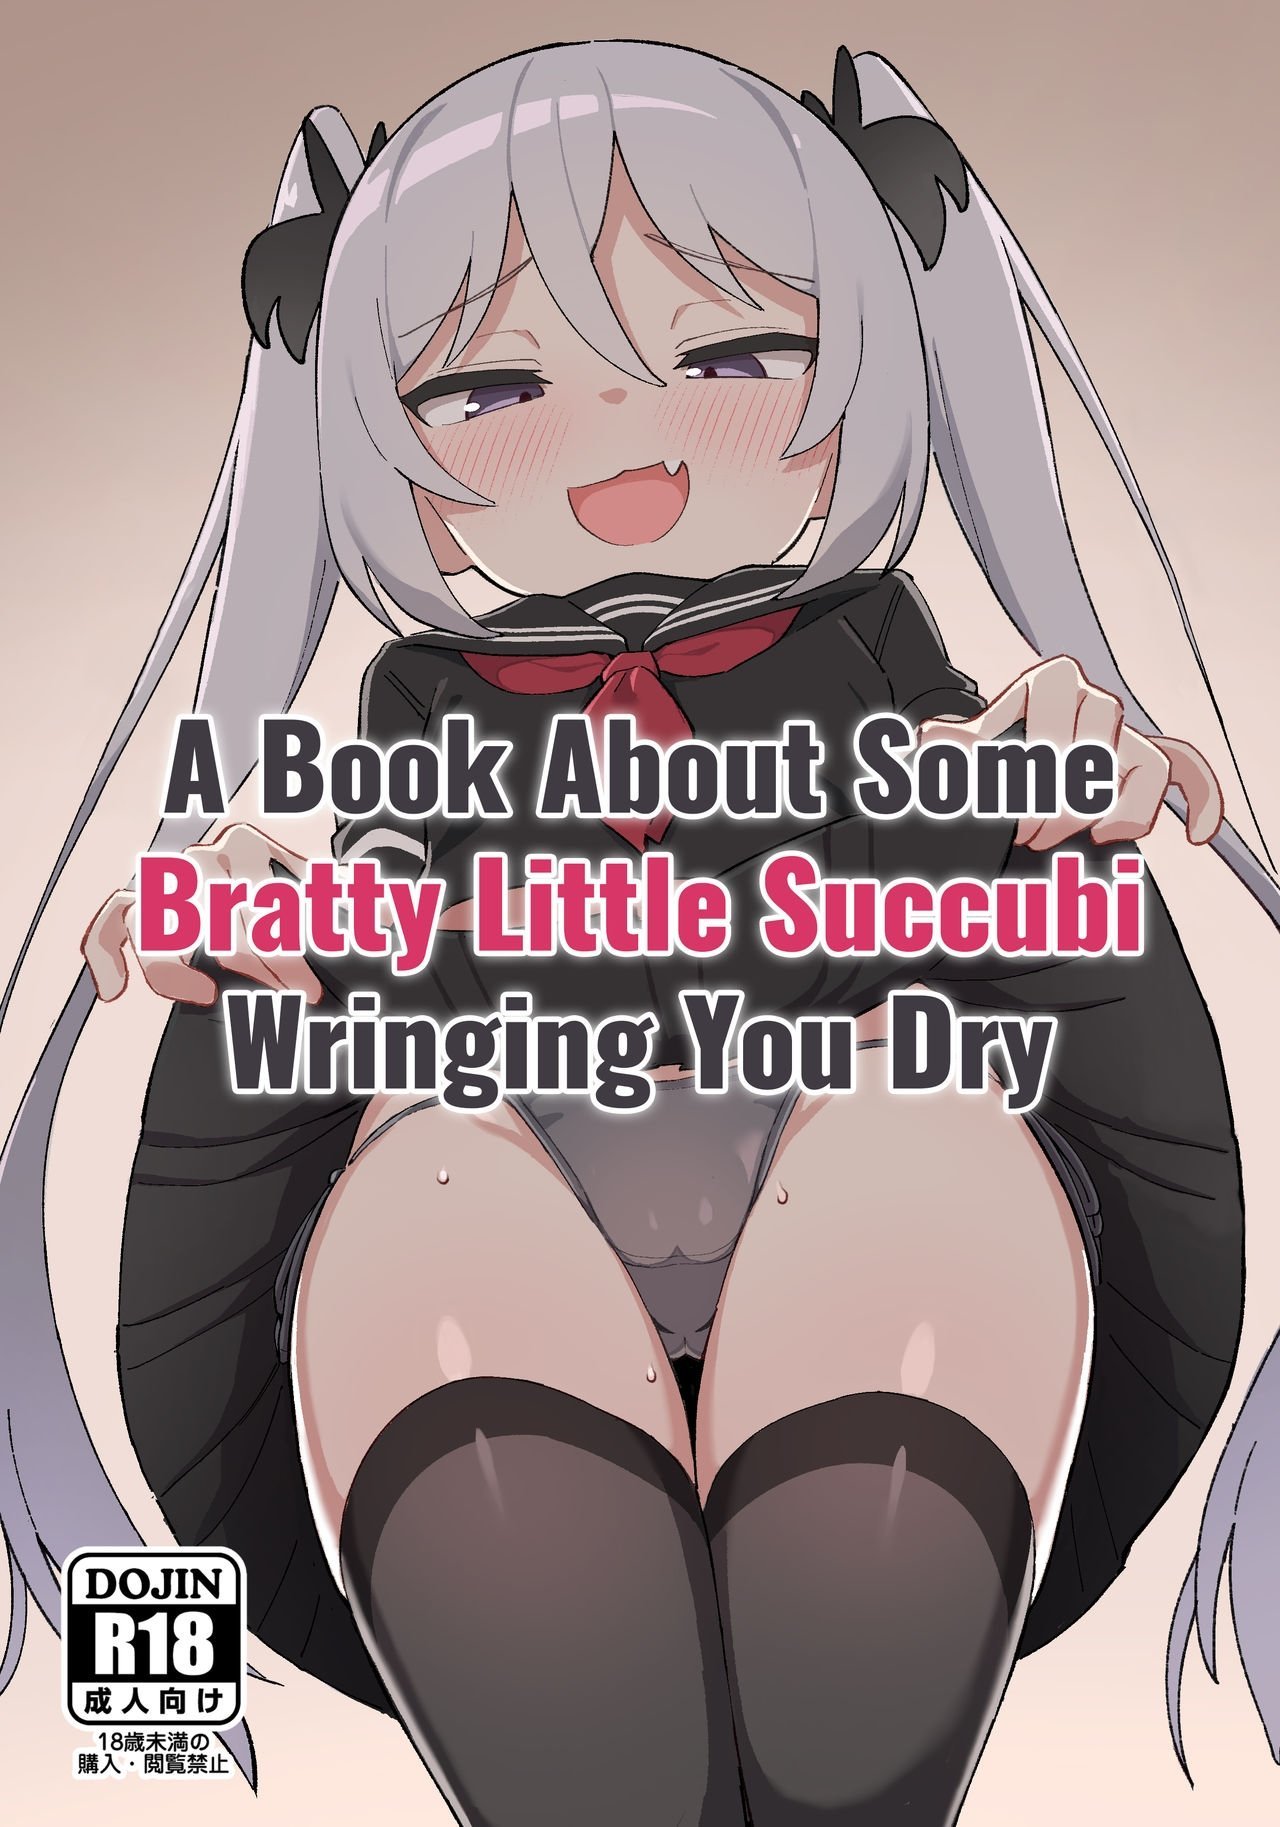 A Book About Some Bratty Little Succubi Wringing You Dry - 0